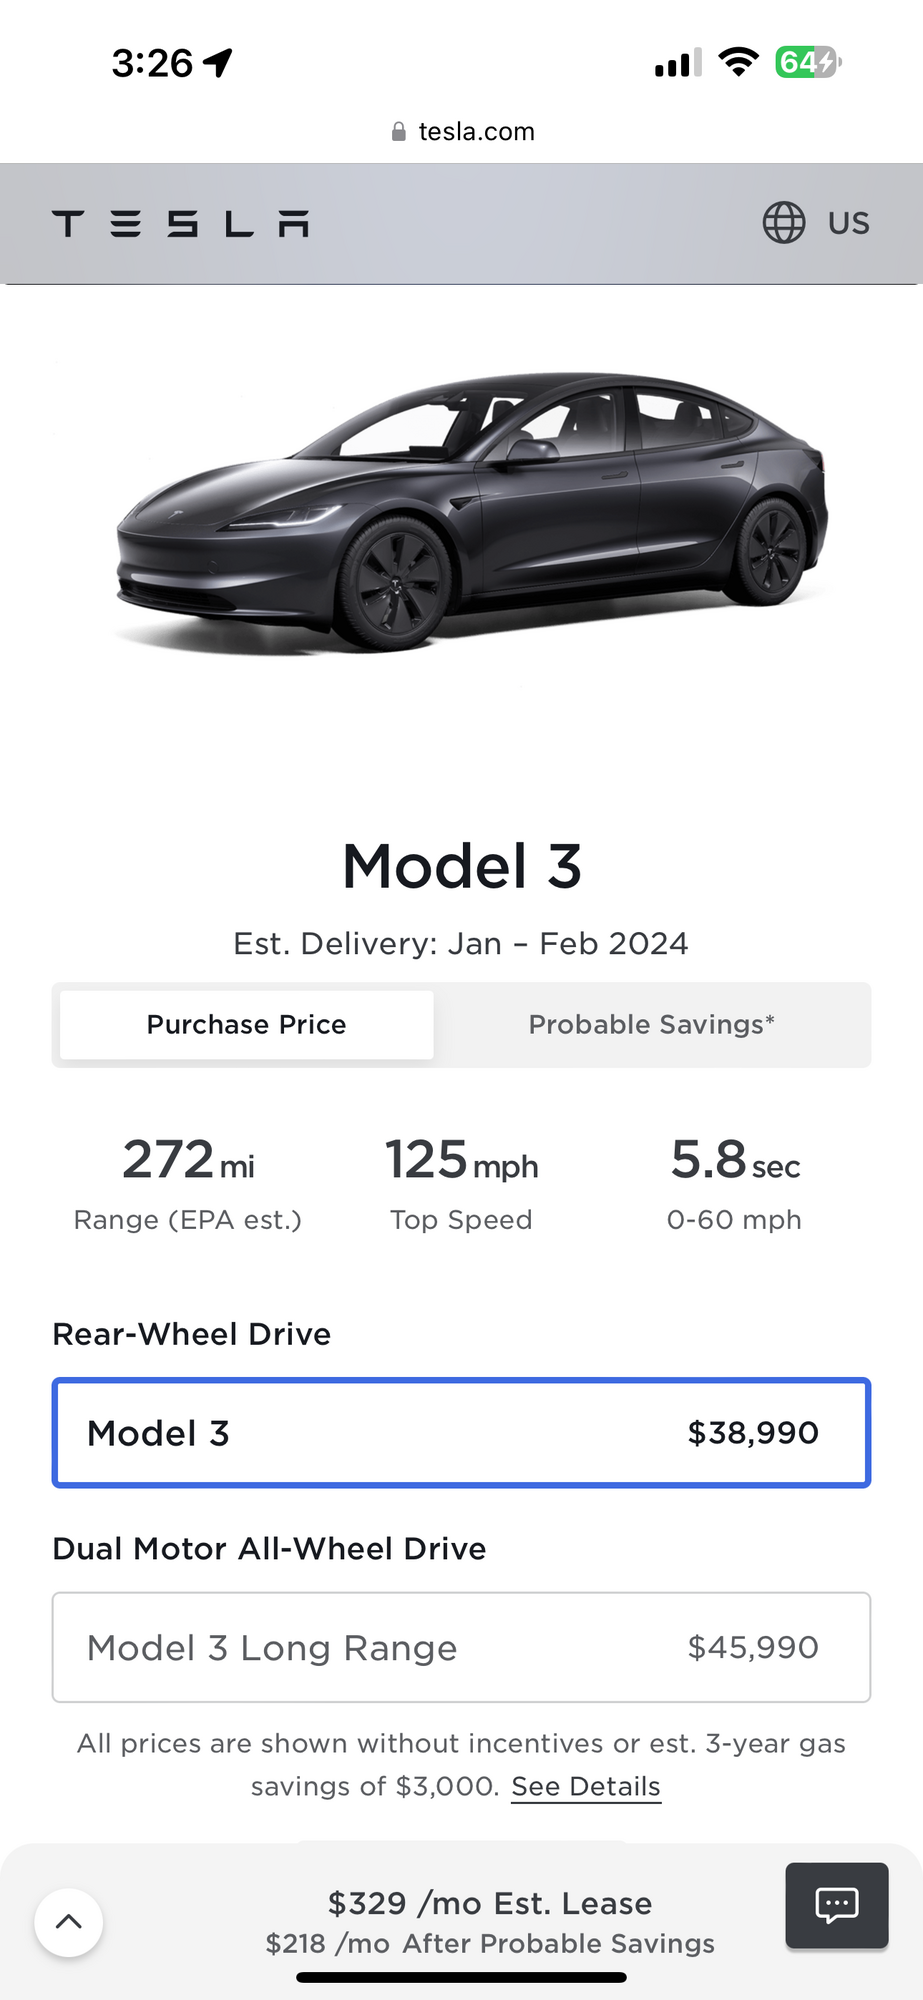 Tesla launches Model 3 Highland refresh in North America - No